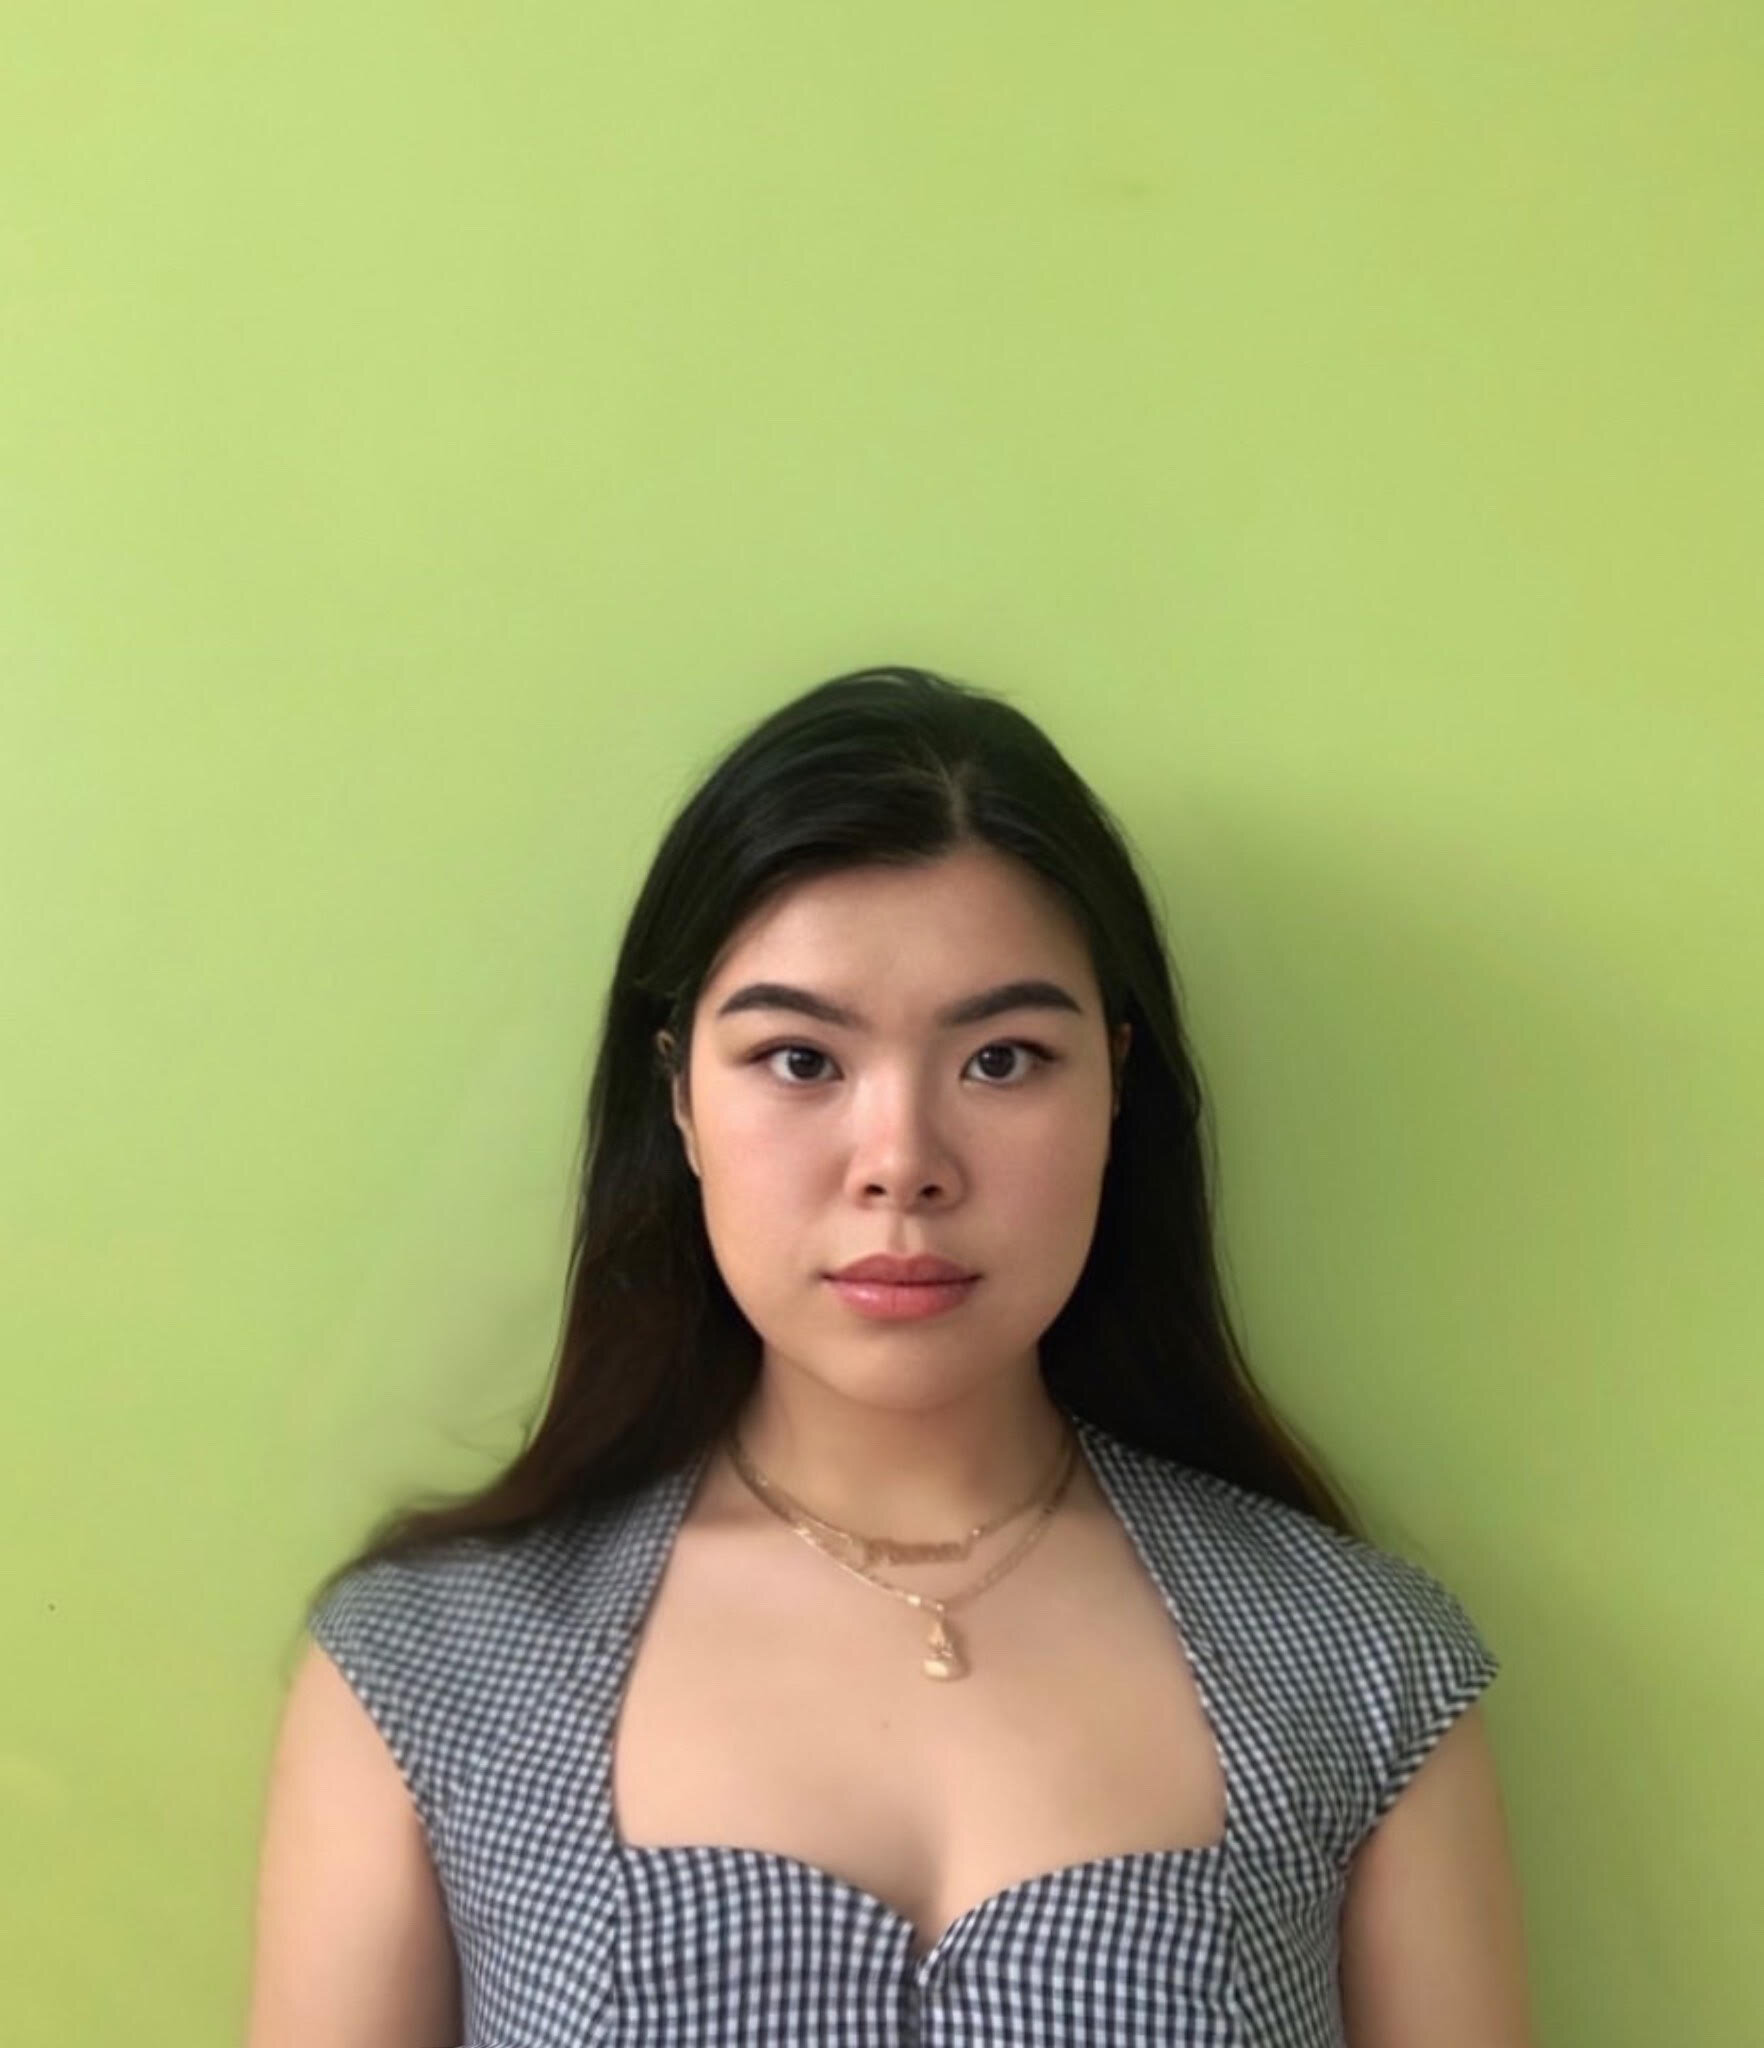 “Xin chào! I’m Fiona Ly, a Chinese-Vietnamese 20 year old born and raised in the UK. Not your typical docile and subservient stereotype who is obsessed with cooking my Asian-fusion creations which have been described as Hit-or-Miss...” - 